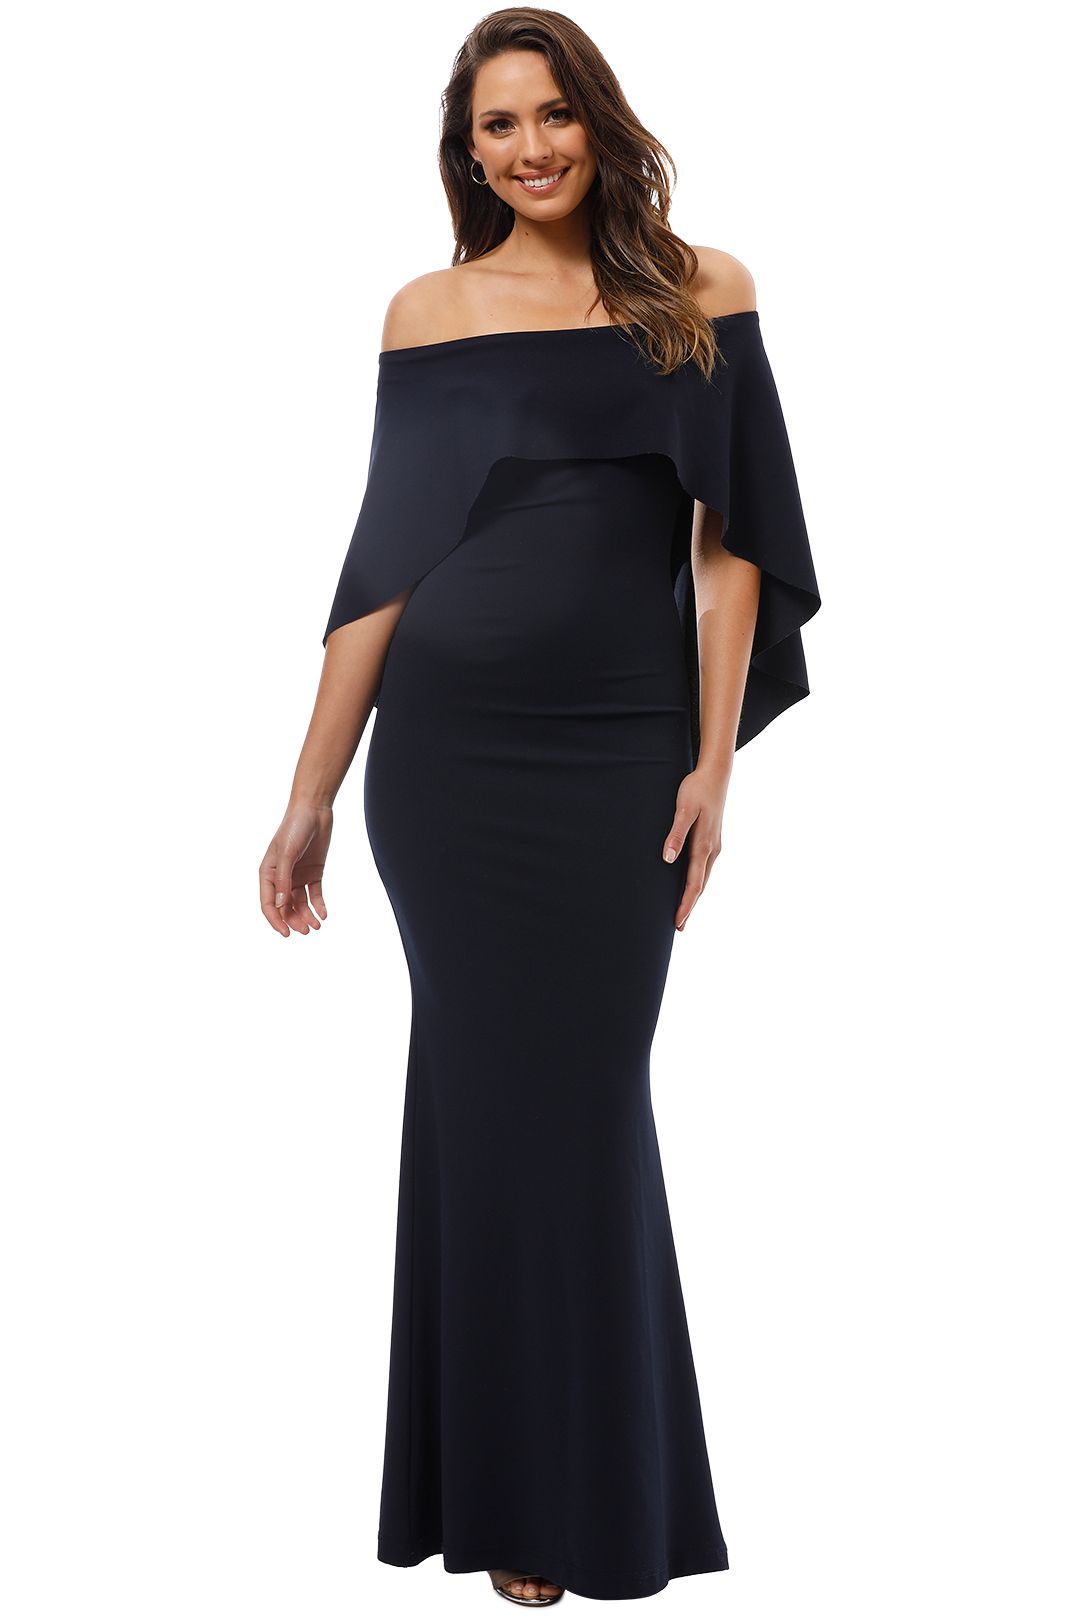 Composure Gown in Navy by Pasduchas for Rent